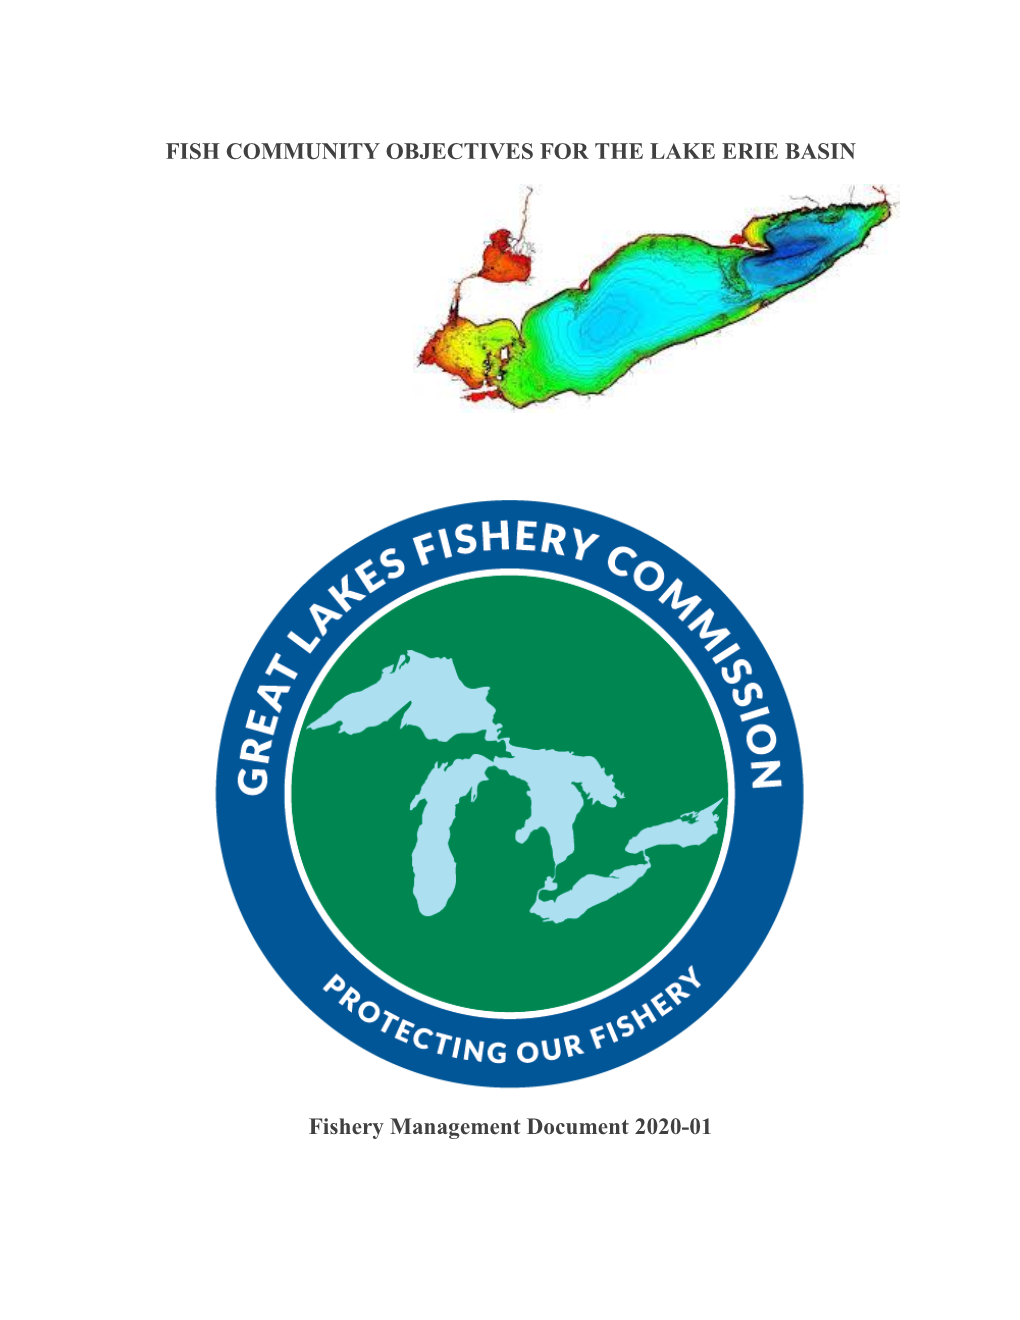 Fish Community Objectives for the Lake Erie Basin